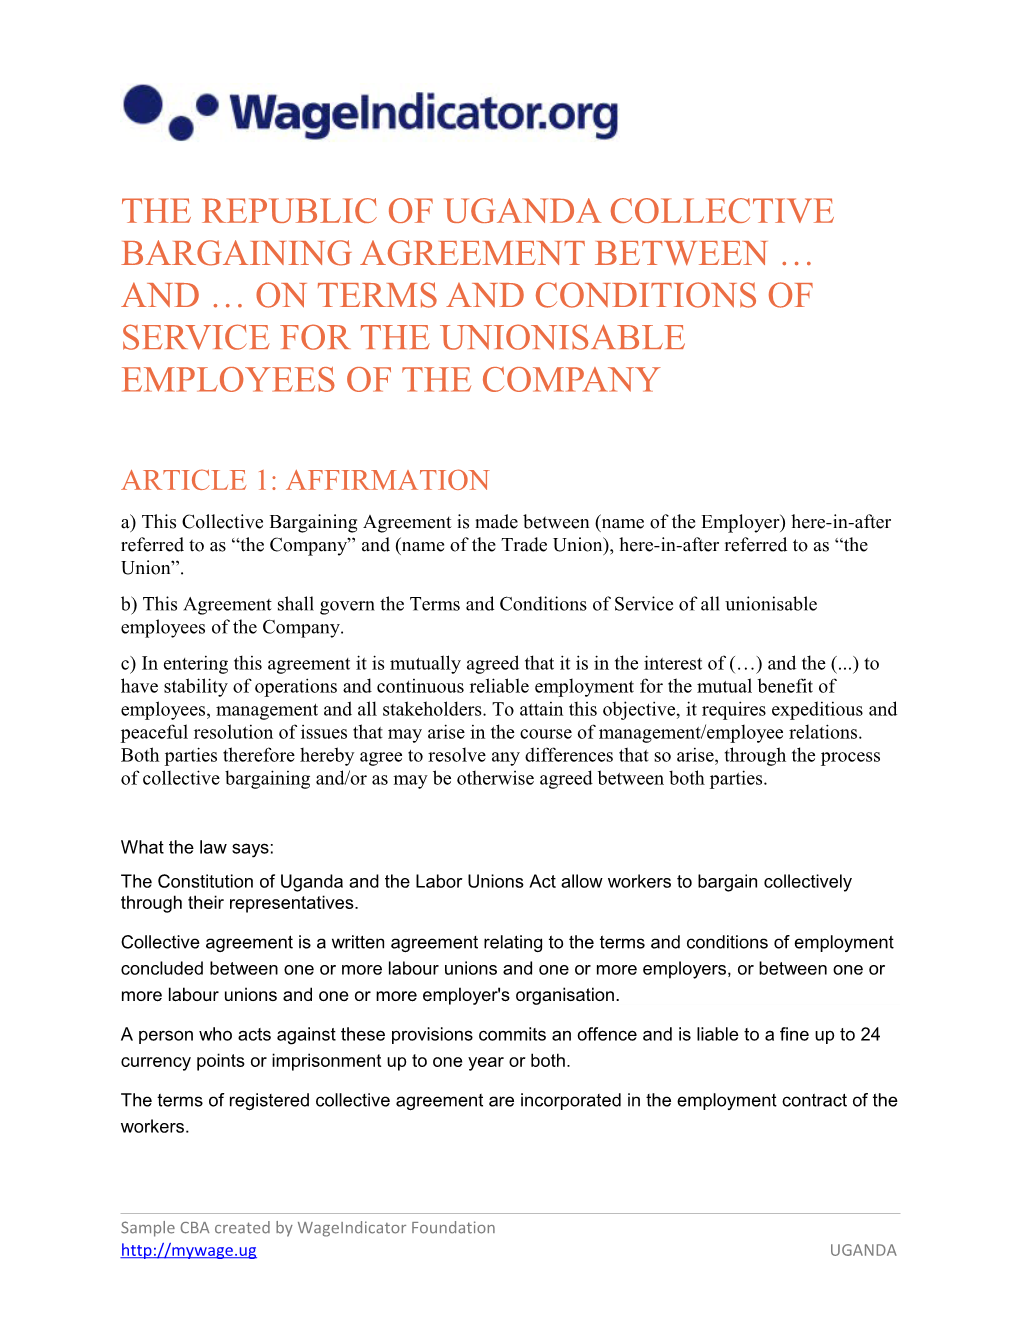 The Republic of Uganda Collective Bargaining Agreement Between and on Terms and Conditions